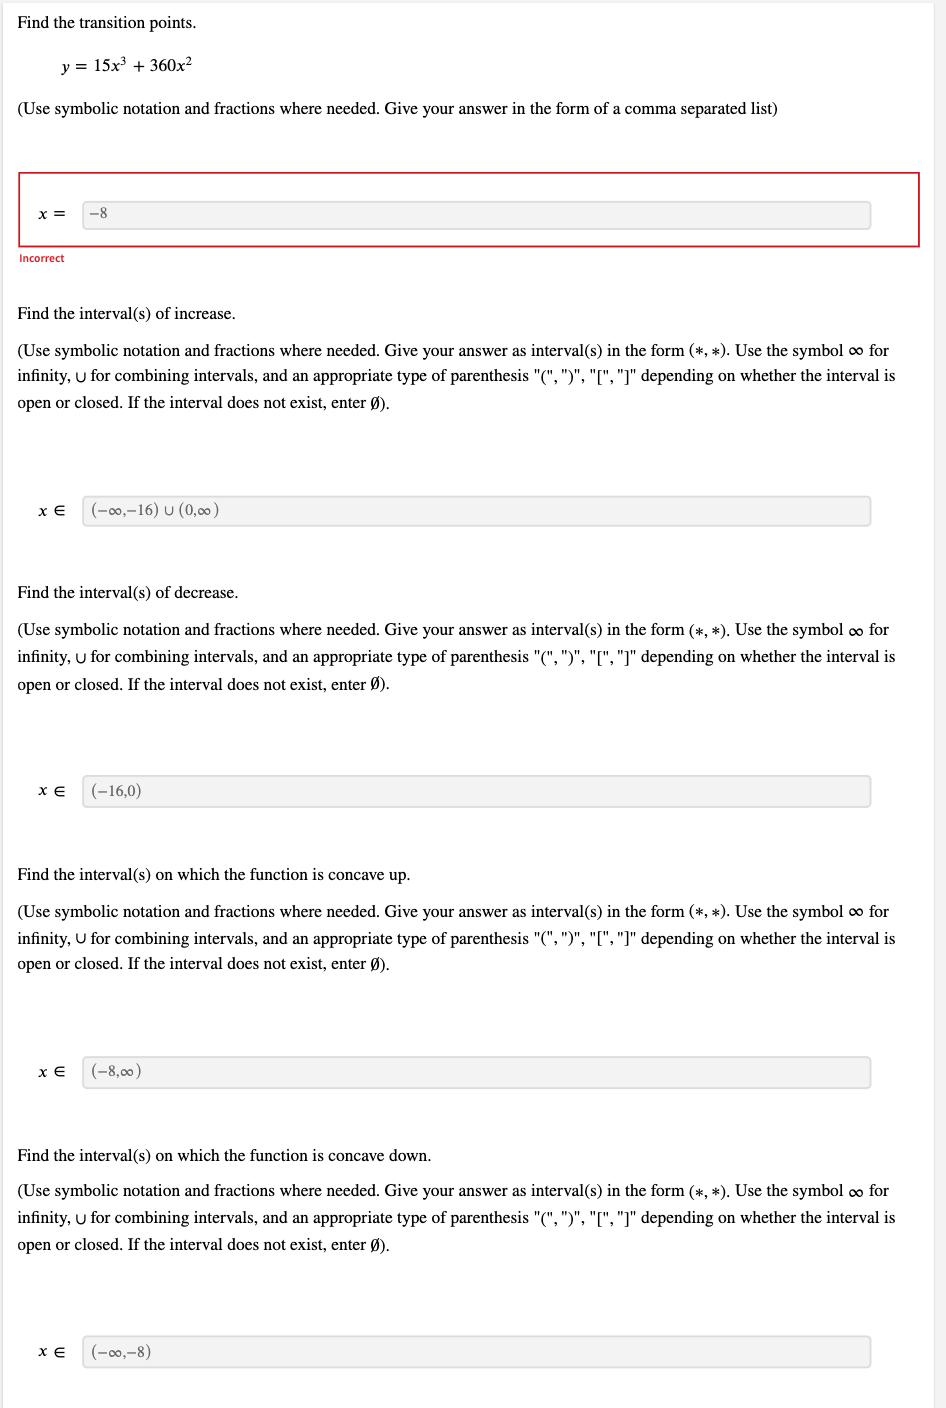 Find the transition points.
y = 15x³ + 360x²
(Use symbolic notation and fractions where needed. Give your answer in the form of a comma separated list)
x = -8
Incorrect
Find the interval(s) of increase.
(Use symbolic notation and fractions where needed. Give your answer as interval(s) in the form (*, *). Use the symbol ∞ for
infinity, U for combining intervals, and an appropriate type of parenthesis "(", ")", "[", "]" depending on whether the interval is
open or closed. If the interval does not exist, enter Ø).
x E (-∞0,-16) U (0,00)
Find the interval(s) of decrease.
(Use symbolic notation and fractions where needed. Give your answer as interval(s) in the form (*, *). Use the symbol ∞ for
infinity, U for combining intervals, and an appropriate type of parenthesis "(", ")", "[", "]" depending on whether the interval is
open or closed. If the interval does not exist, enter Ø).
XE (-16,0)
Find the interval(s) on which the function is concave up.
(Use symbolic notation and fractions where needed. Give your answer as interval(s) in the form (*, *). Use the symbol ∞ for
infinity, U for combining intervals, and an appropriate type of parenthesis "(", ")", "[", "]" depending on whether the interval is
open or closed. If the interval does not exist, enter Ø).
x E (-8,00)
Find the interval(s) on which the function is concave down.
(Use symbolic notation and fractions where needed. Give your answer as interval(s) in the form (*, *). Use the symbol ∞ for
infinity, U for combining intervals, and an appropriate type of parenthesis "(", ")", "[", "]" depending on whether the interval is
open or closed. If the interval does not exist, enter Ø).
XE
(-∞0,-8)